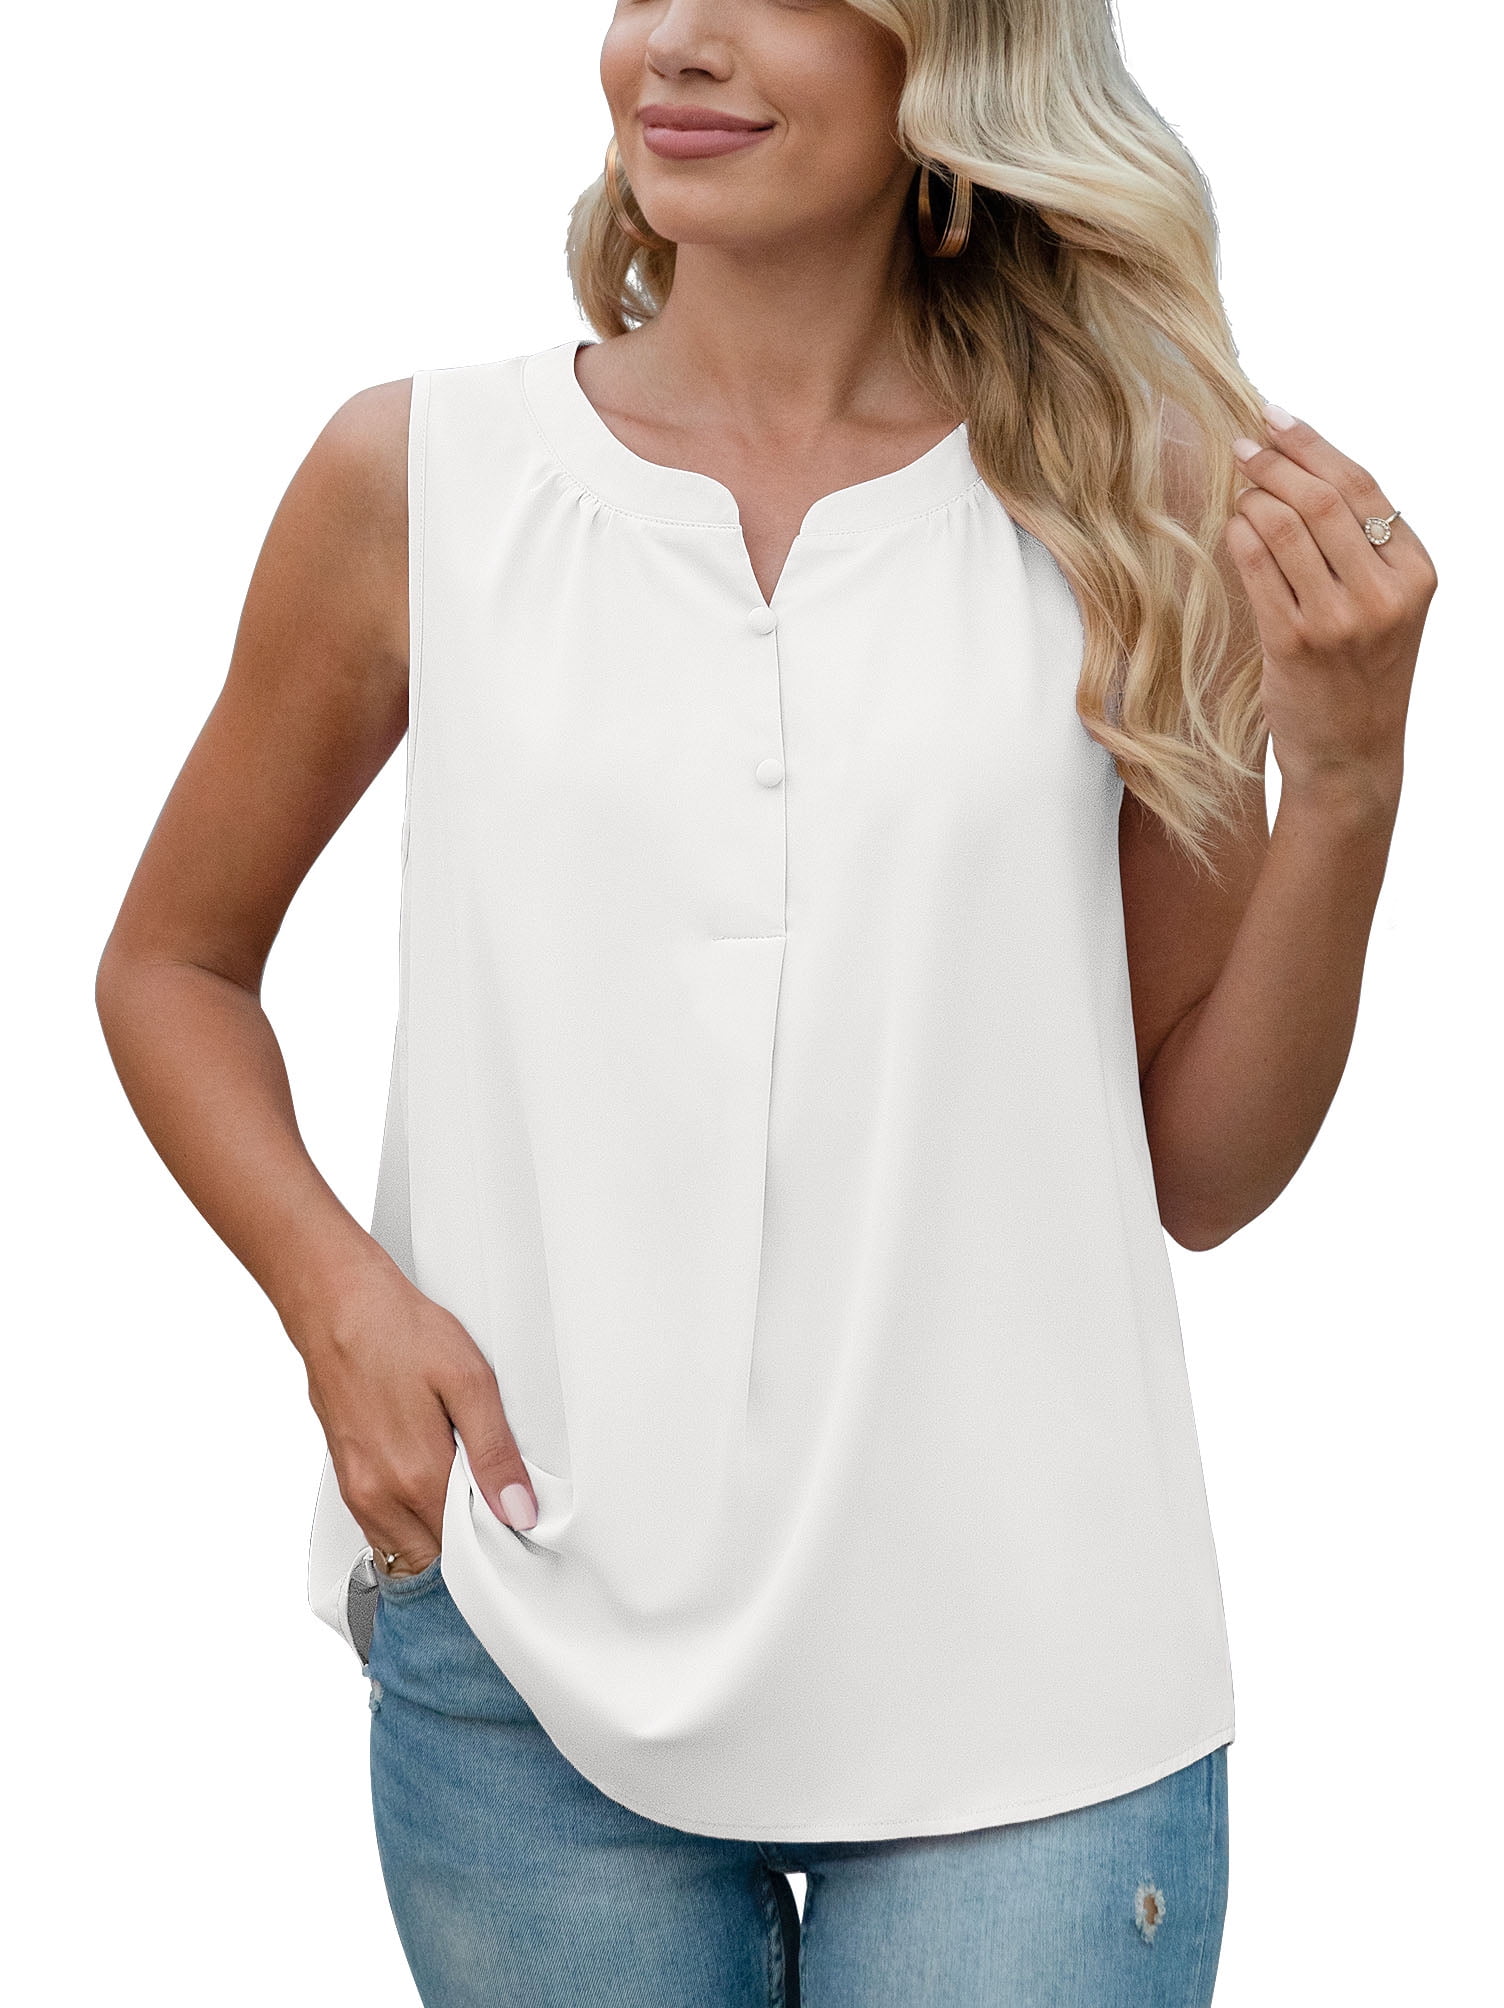 Uvplove Women's Summer Sleeveless Chiffon Tank Tops Blouses Work Casual V  Neck Button Blouses Shirts Tops,US Size Large In White